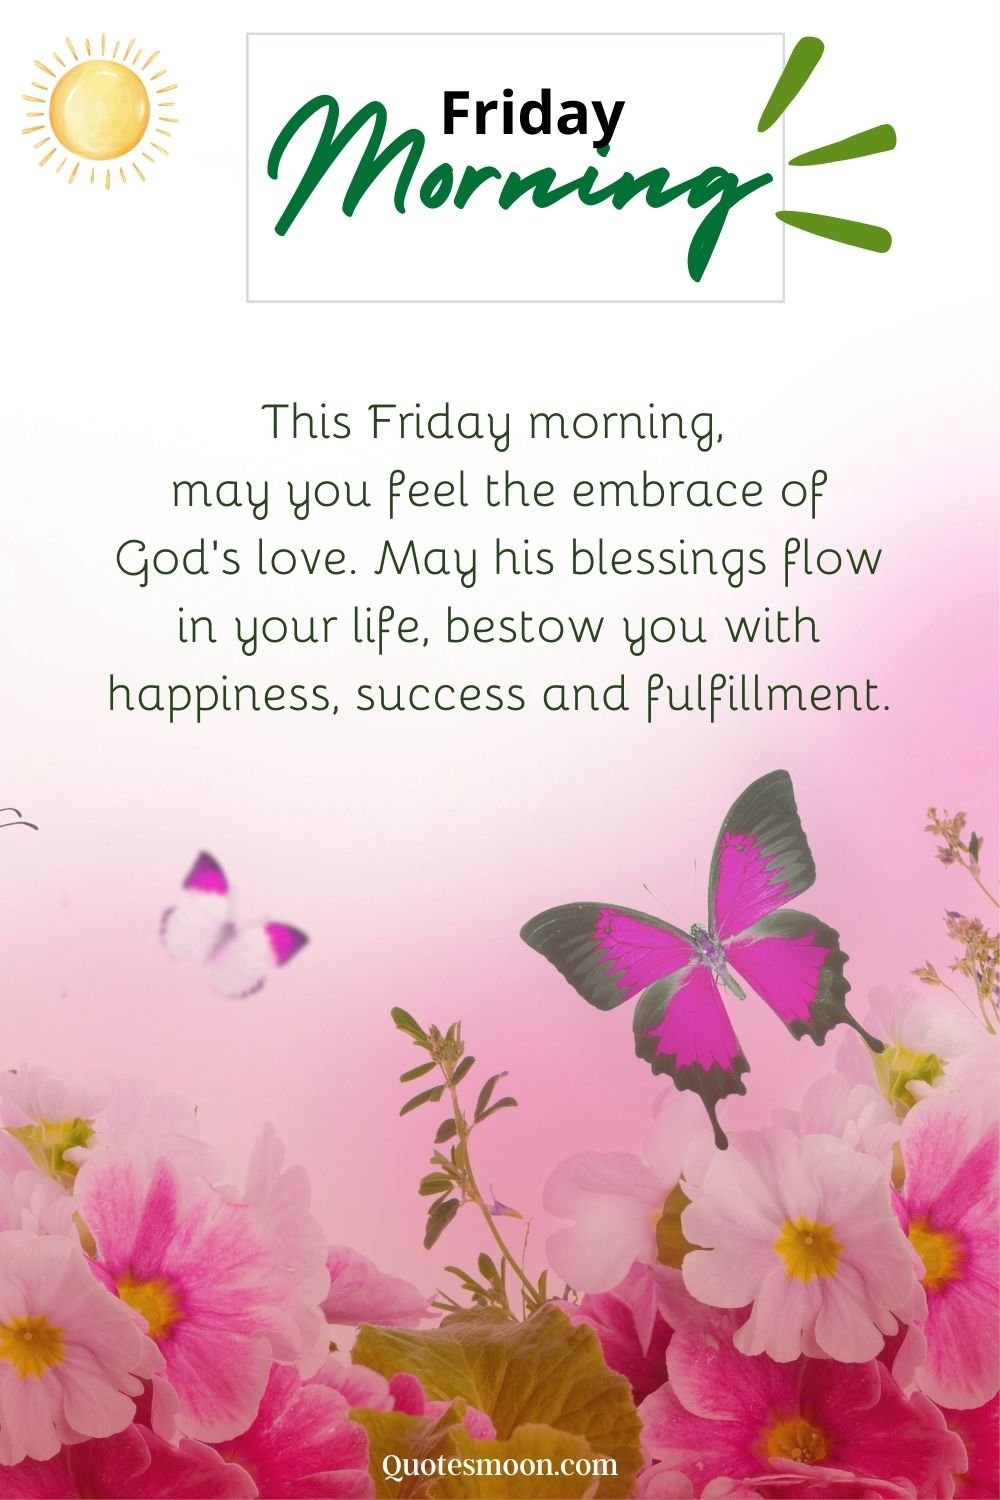 70 Friday Morning Blessings And Prayers